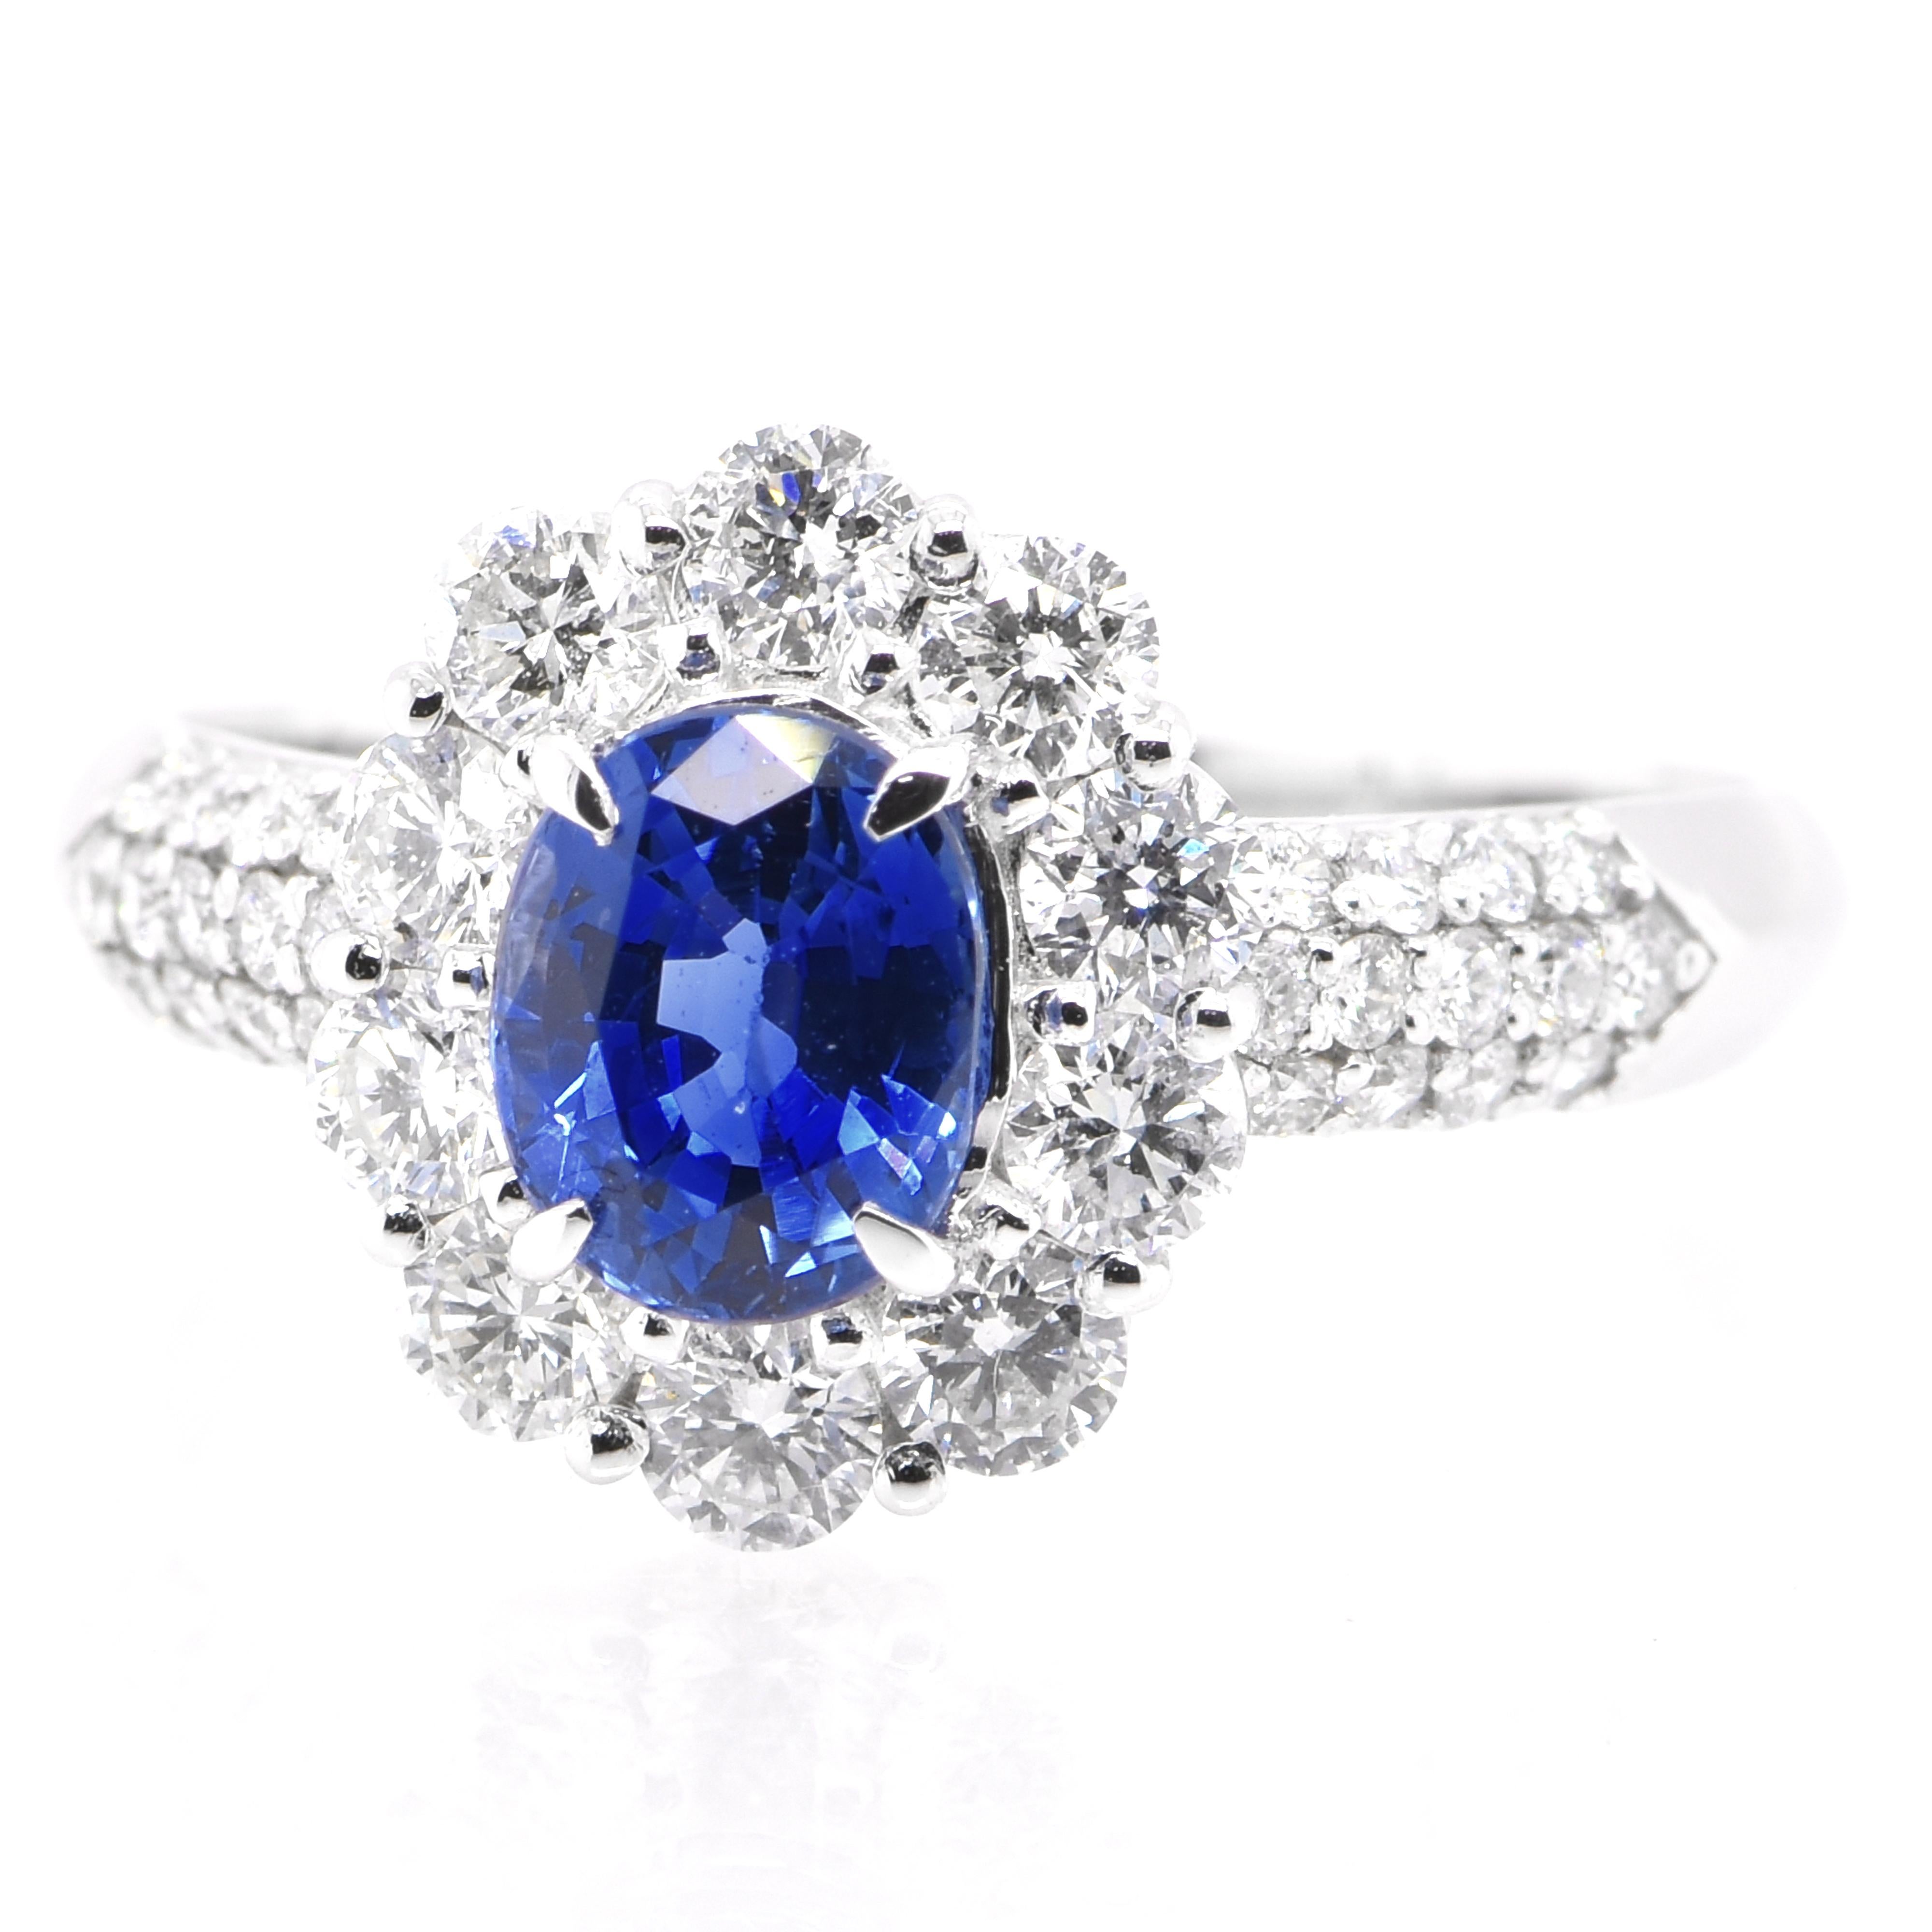 A beautiful ring featuring a 1.045 Carat Natural Blue Sapphire and 0.77 Carats Diamond Accents set in Platinum. Sapphires have extraordinary durability - they excel in hardness as well as toughness and durability making them very popular in jewelry.